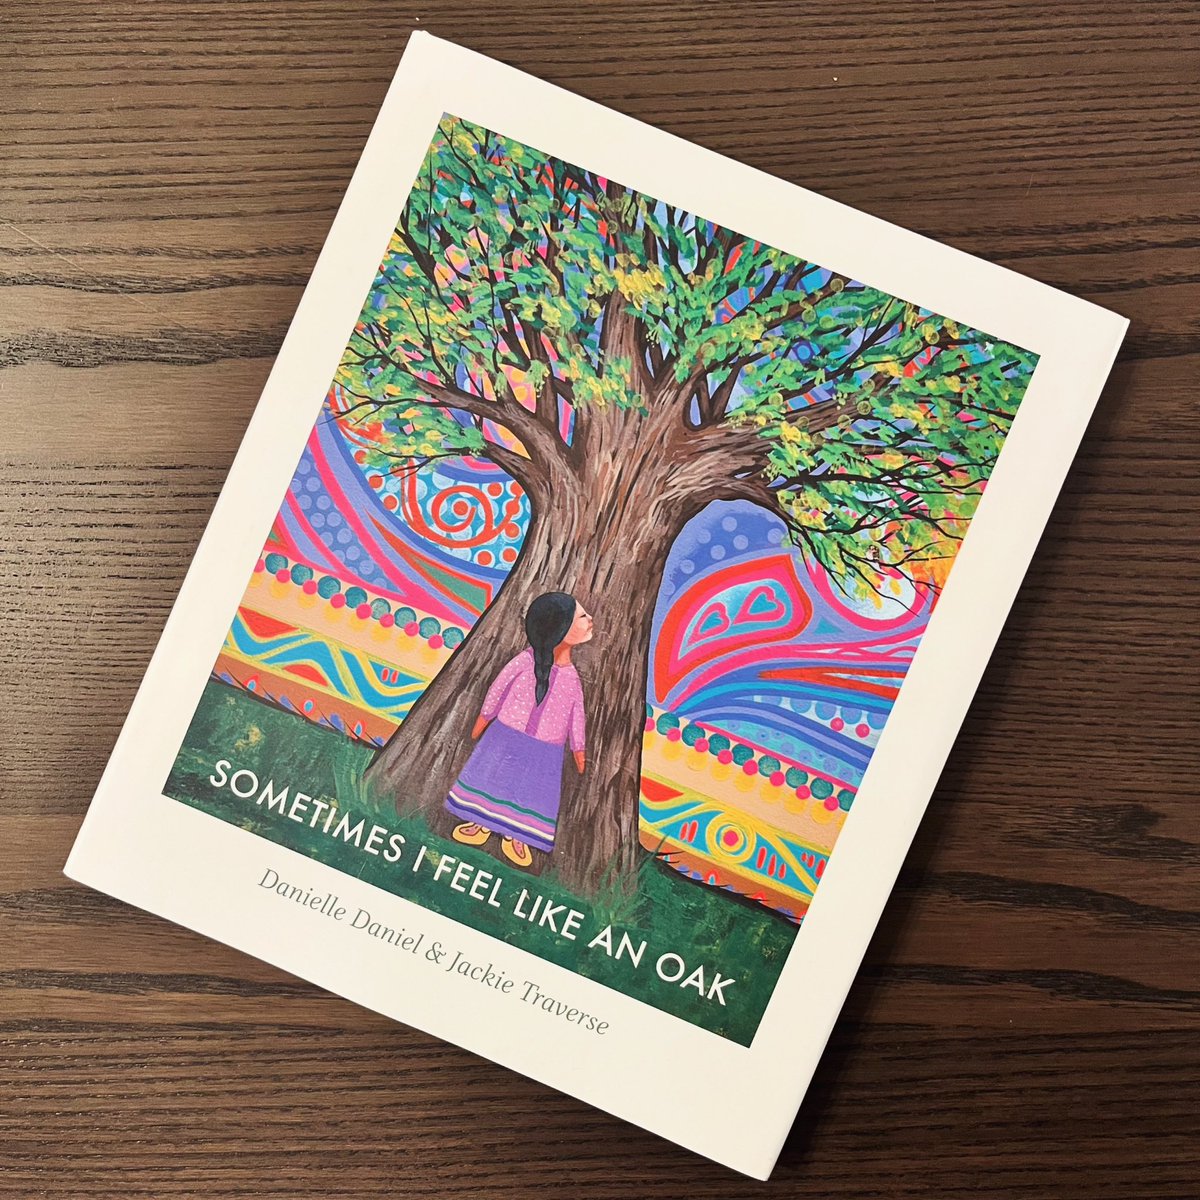 🍃Sometimes I Feel Like an Oak by Danielle Daniel and Jackie Traverse🍃 12 poems for twelve trees from spring to deep winter. The poems include fabulous vocab words such as brimming, dainty, foliage, shivery & more! #literacy #kidlit #science #inquiry #vocabulary #poetry